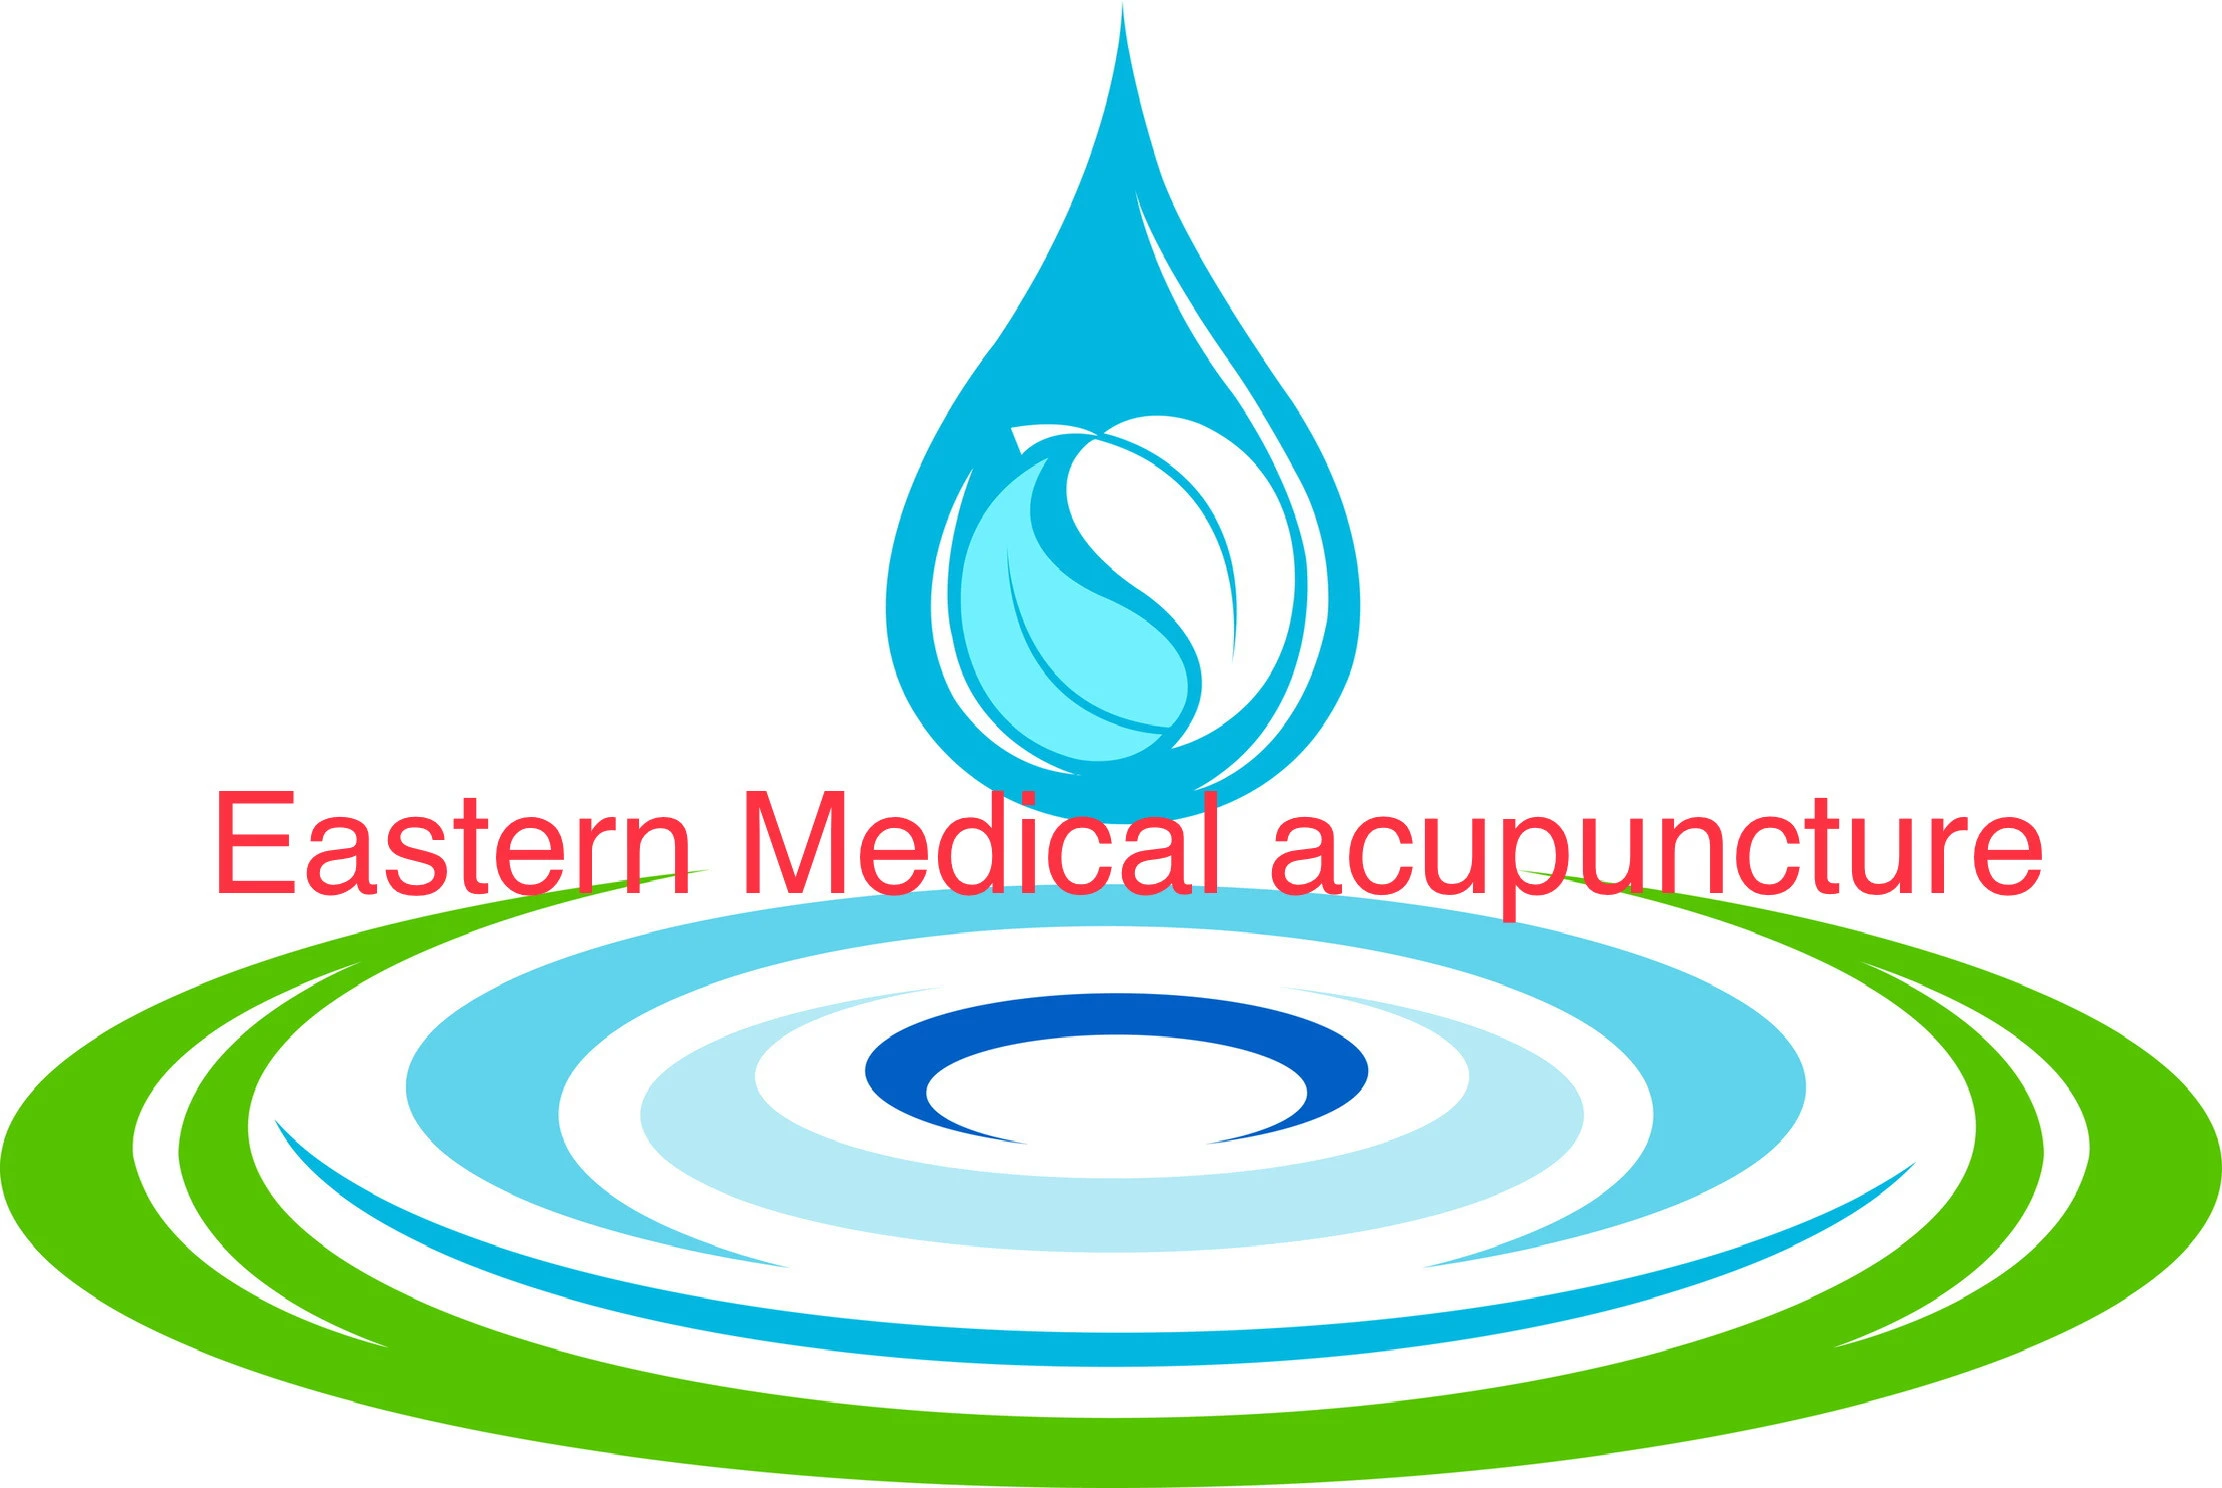 Eastern Medical Acupuncture